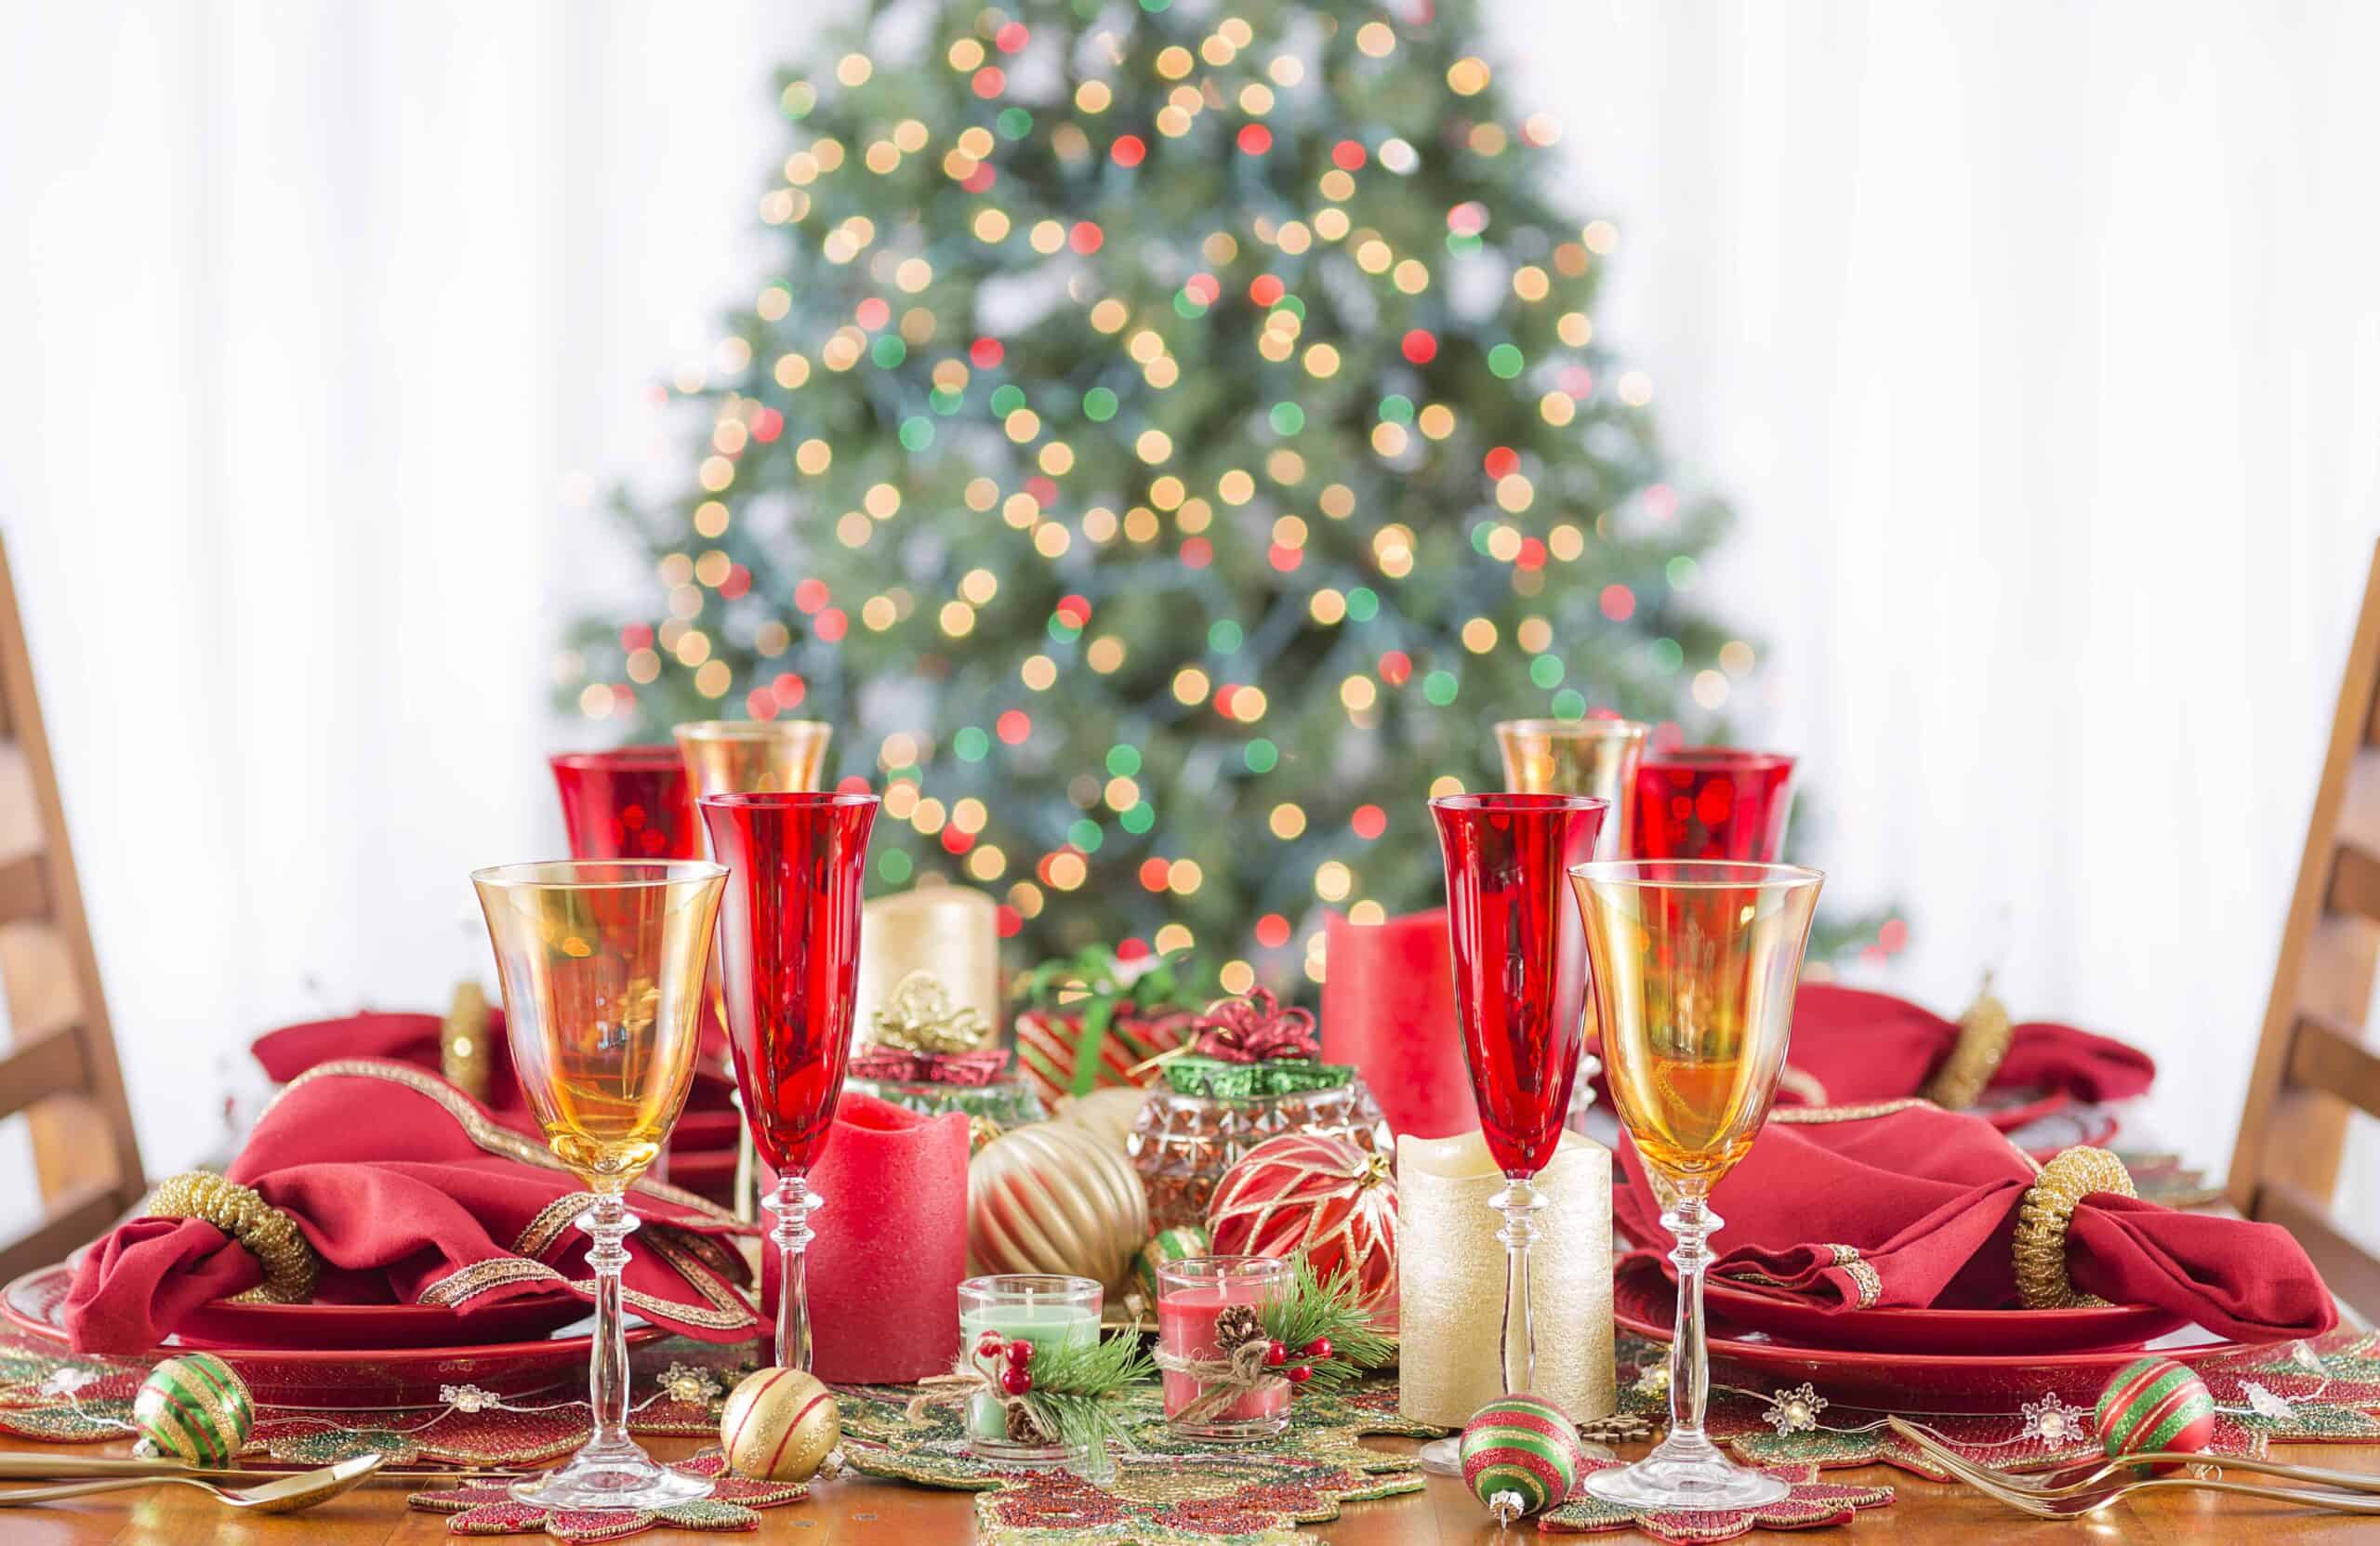 Warm Welcome: Hosting Guests In Your Community During the Holidays